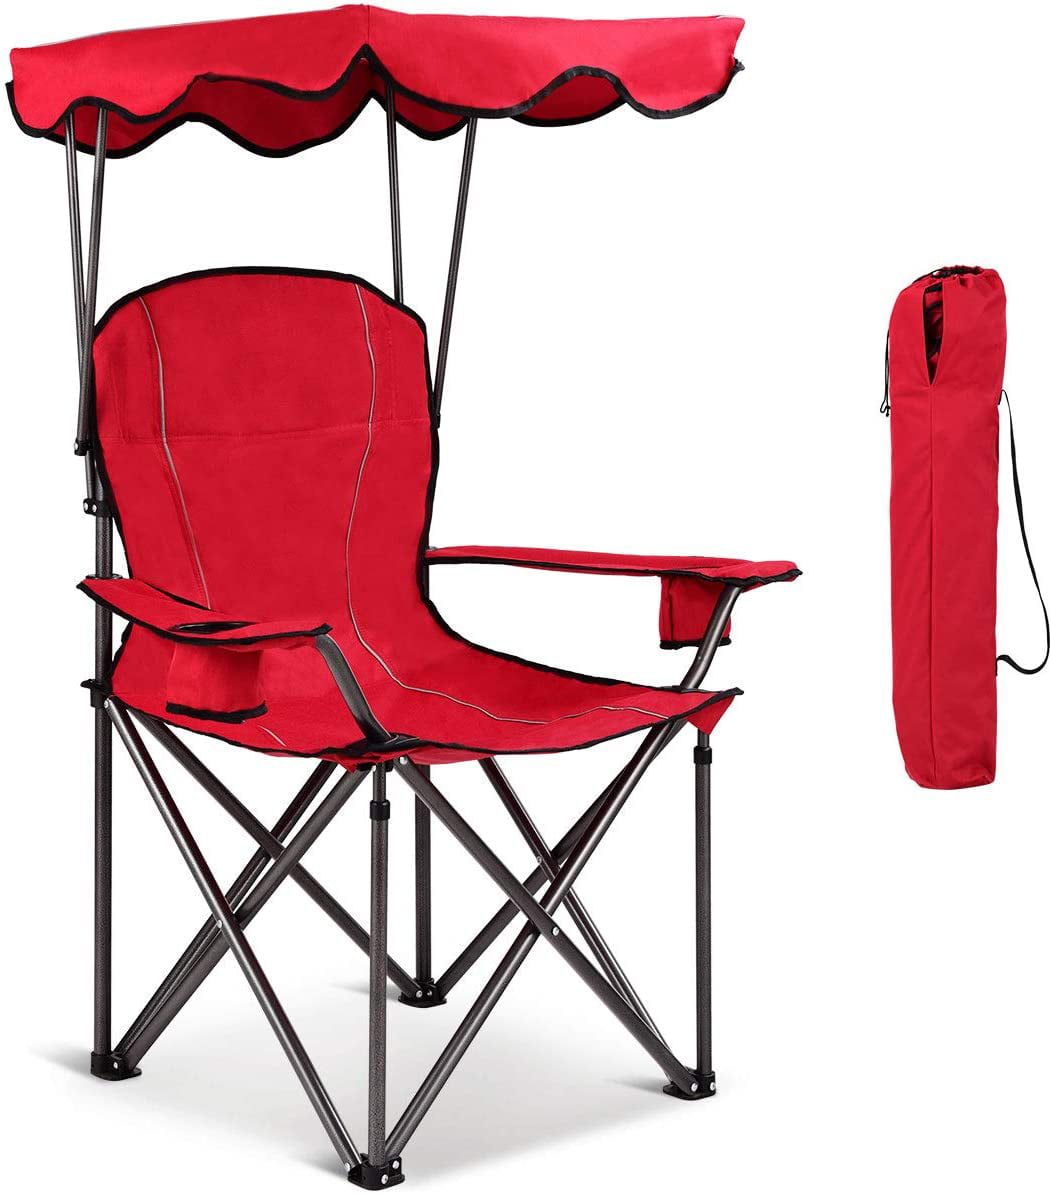 Beach Chair with Canopy Shade, Folding Lawn Chair with Umbrella Cup Holder & Carry Bag, Portable Sunshade Chair for Adults for Outdoor Travel Hiking Fishing, Red